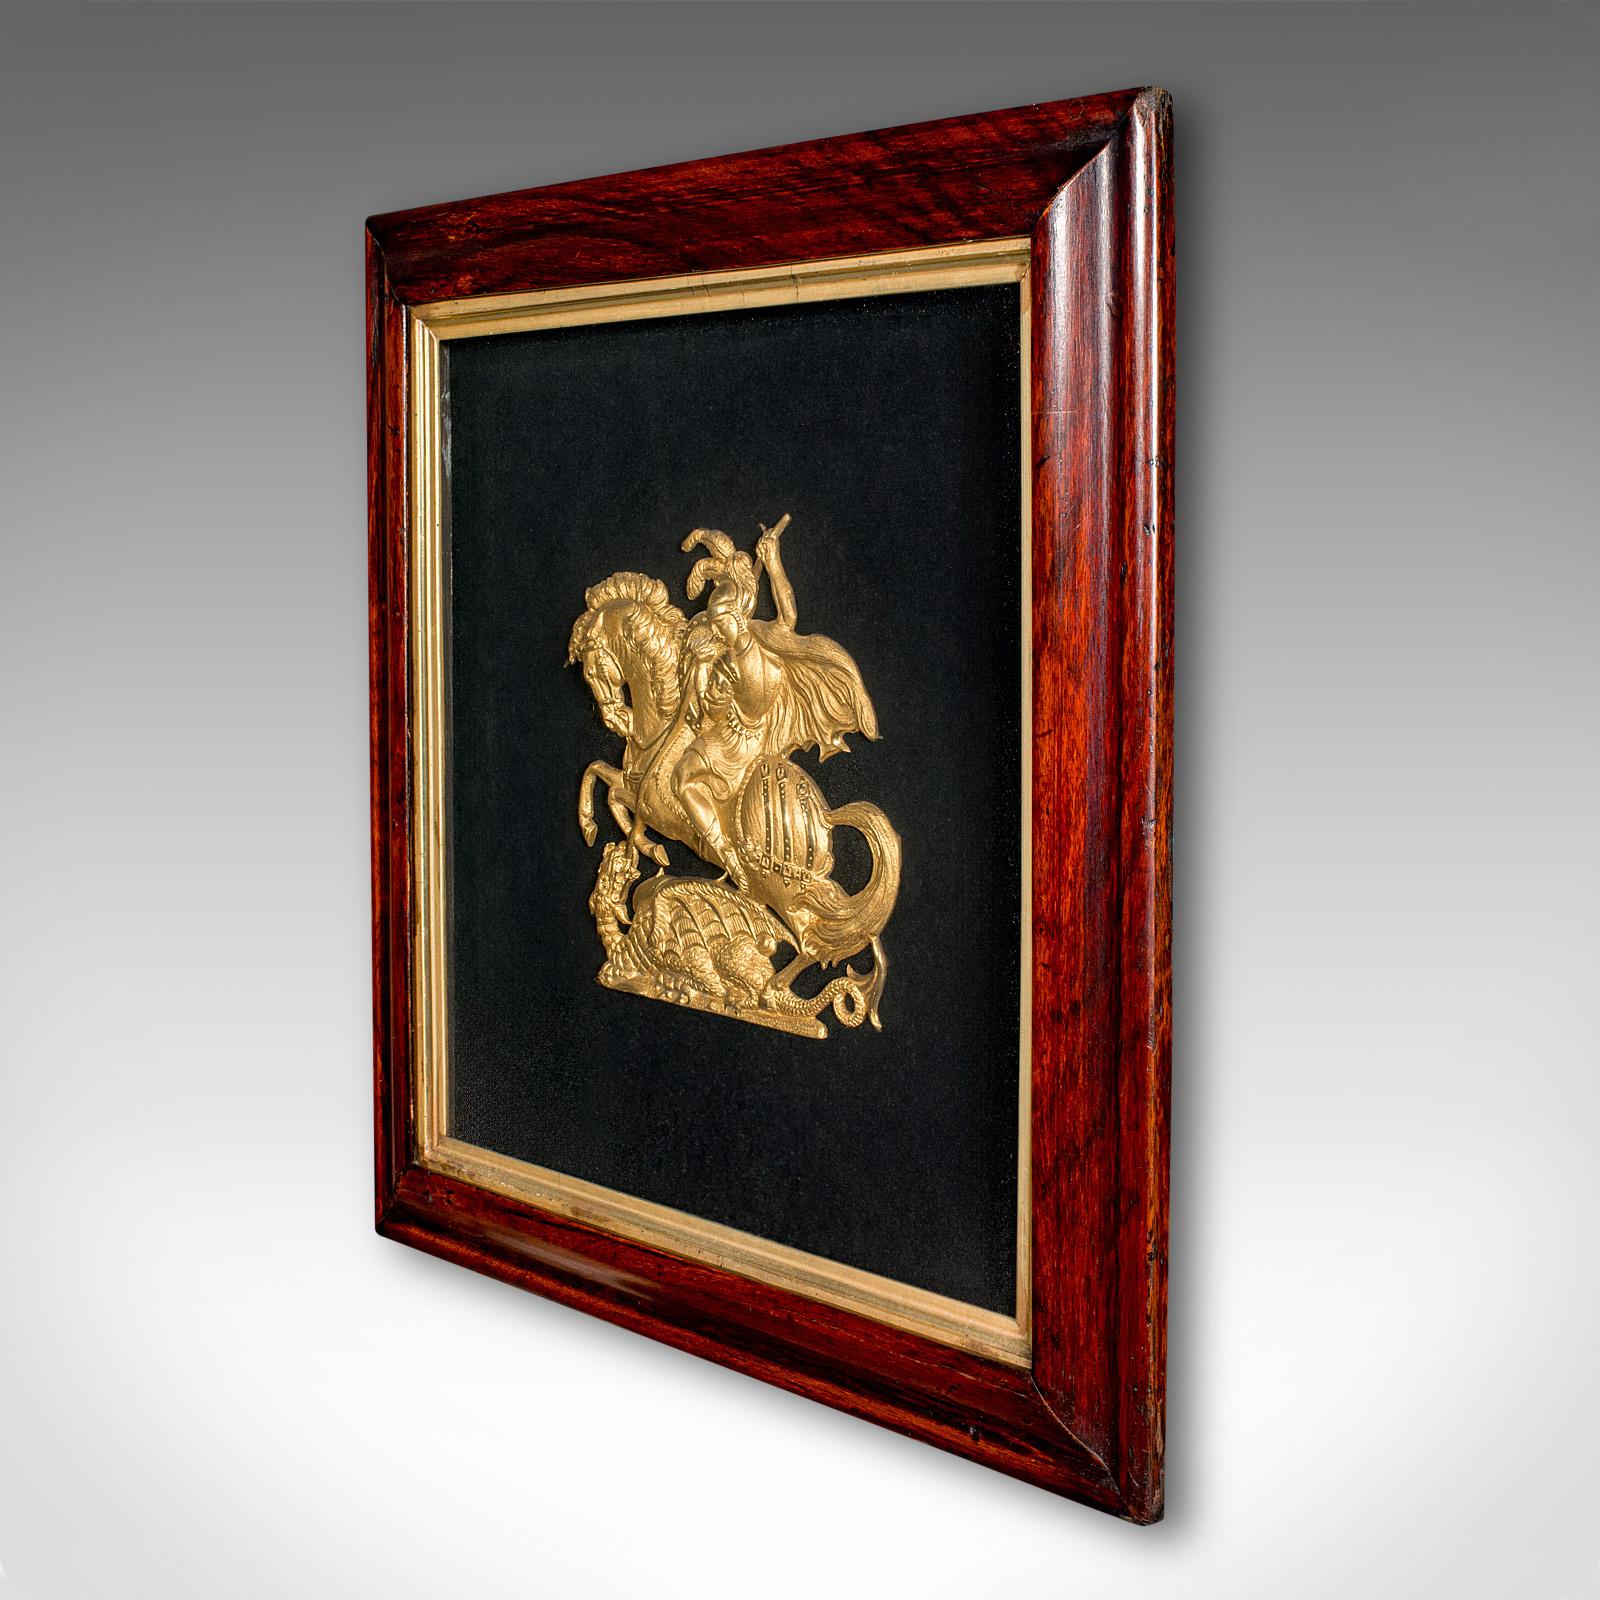 British Antique George & The Dragon Display Plaque, English, Decorative Relief, Regency For Sale